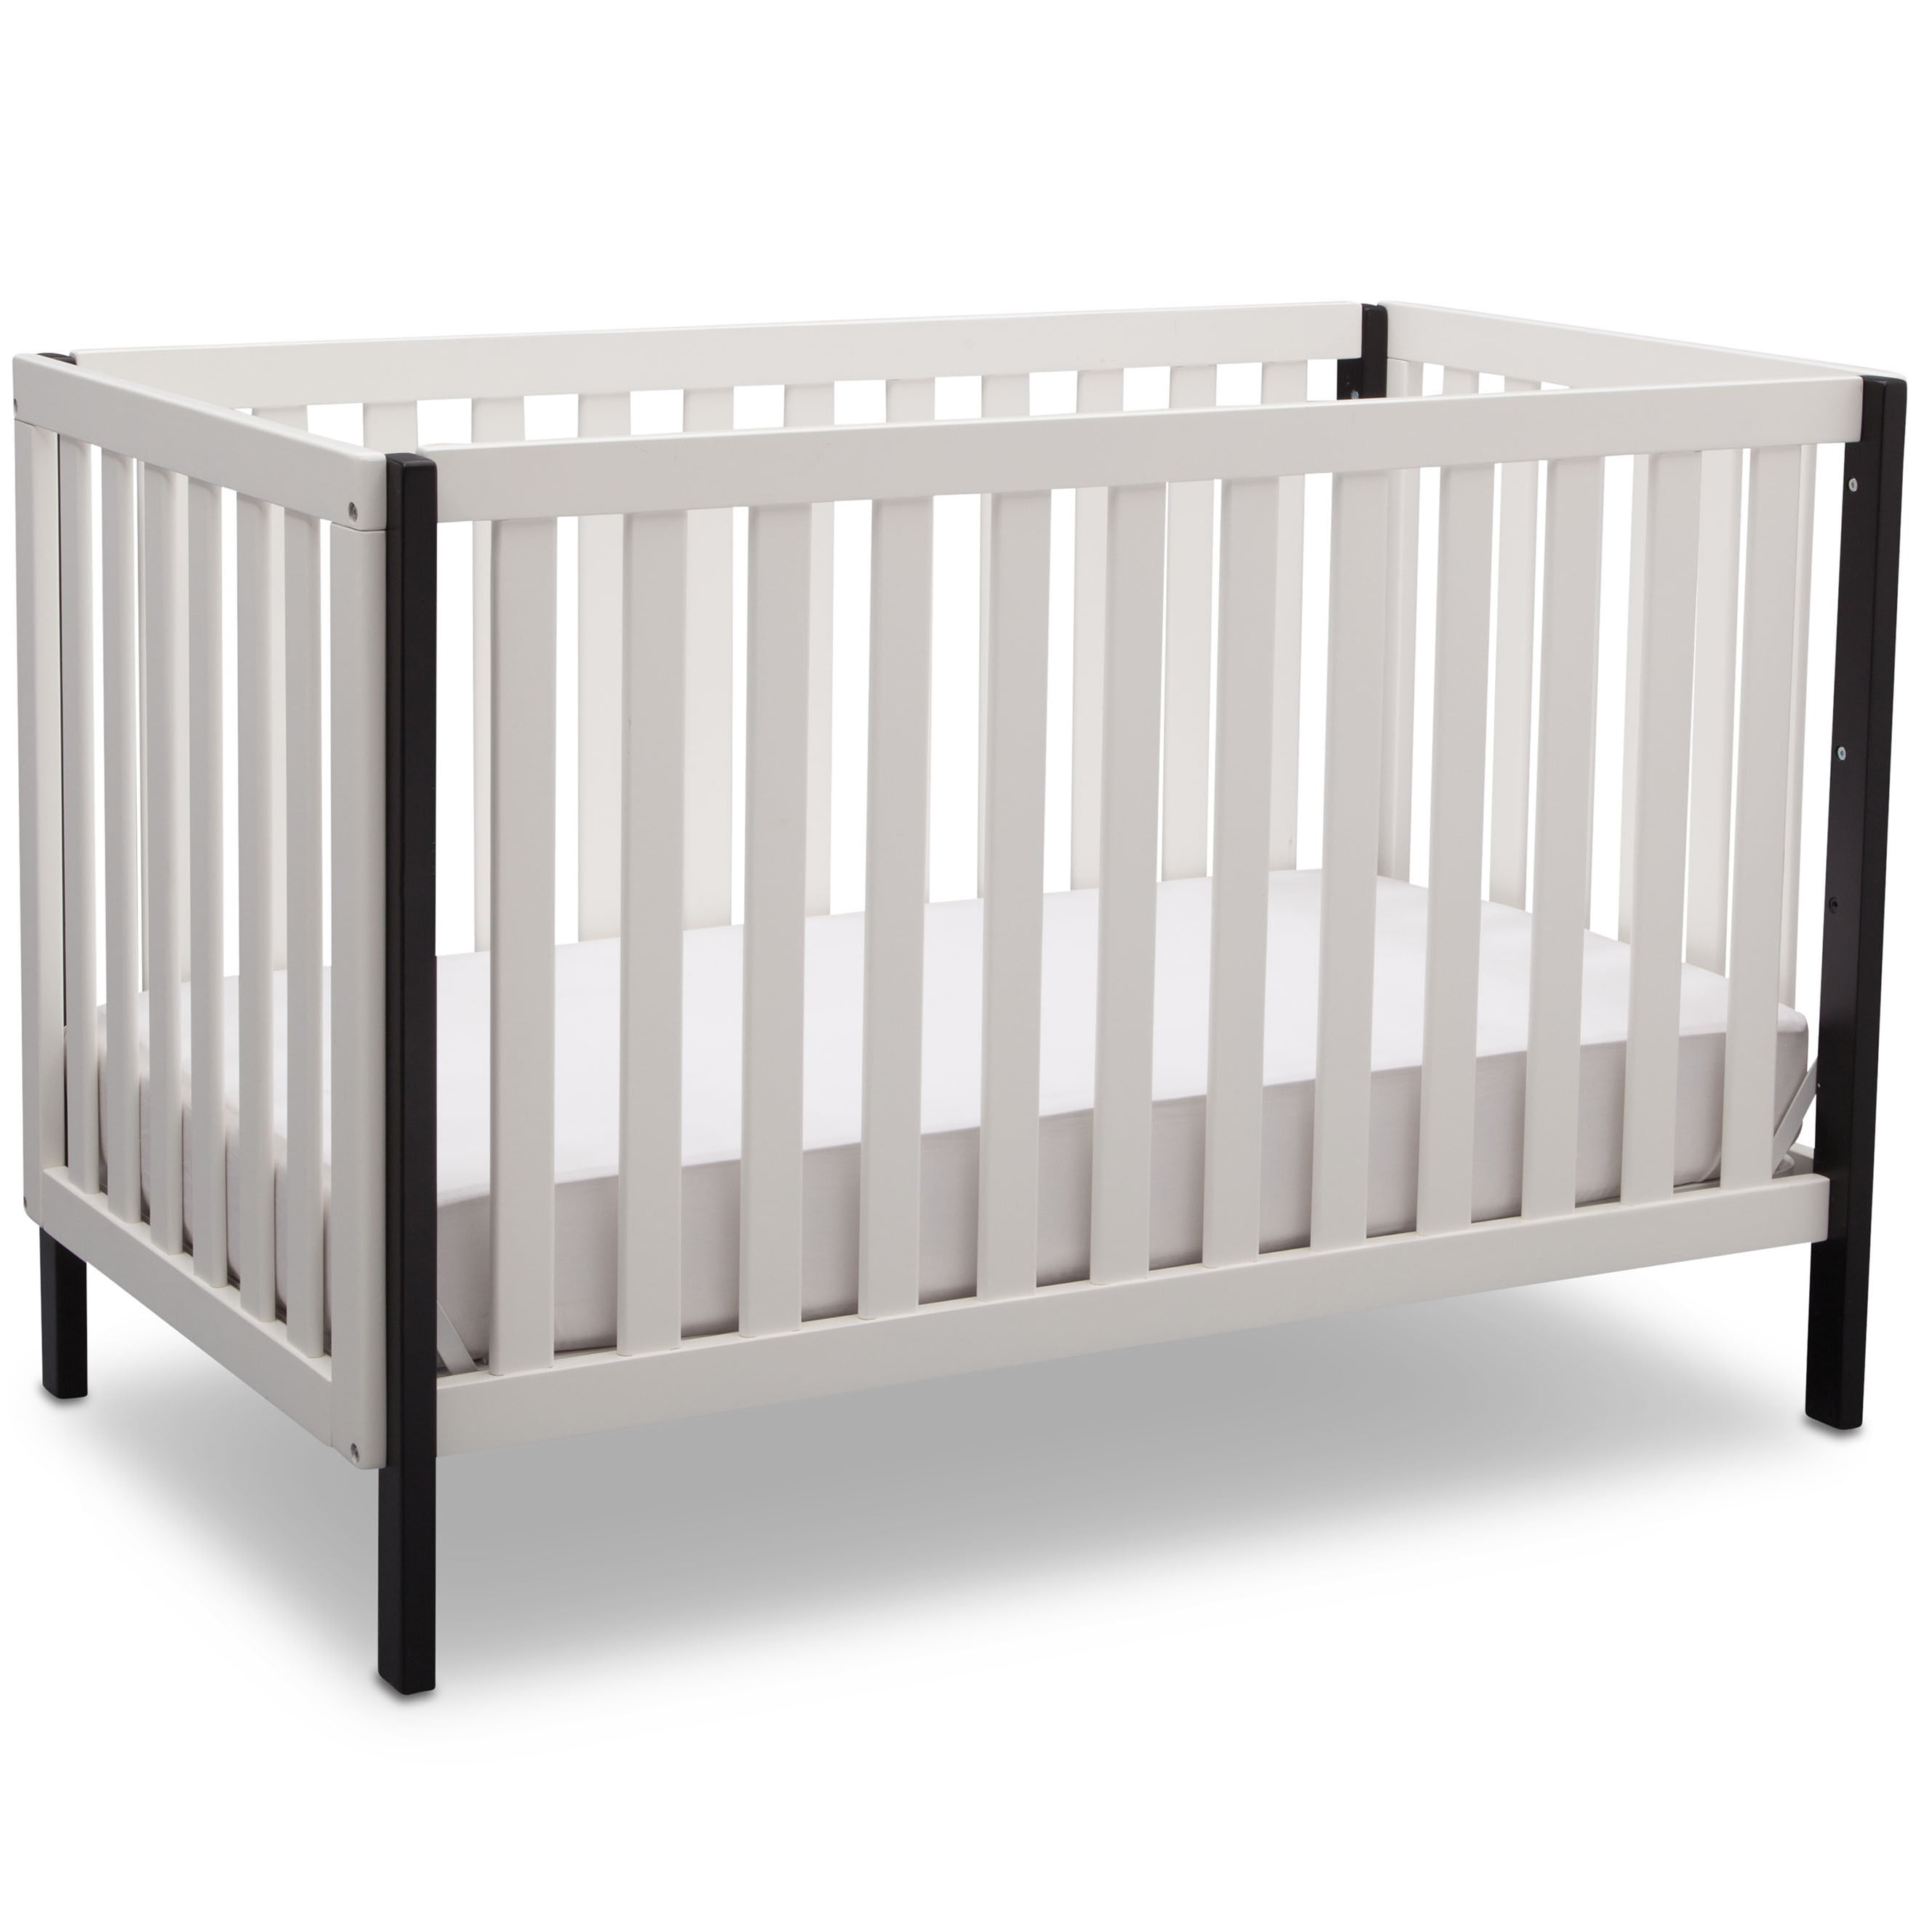 baby cribs for sale walmart